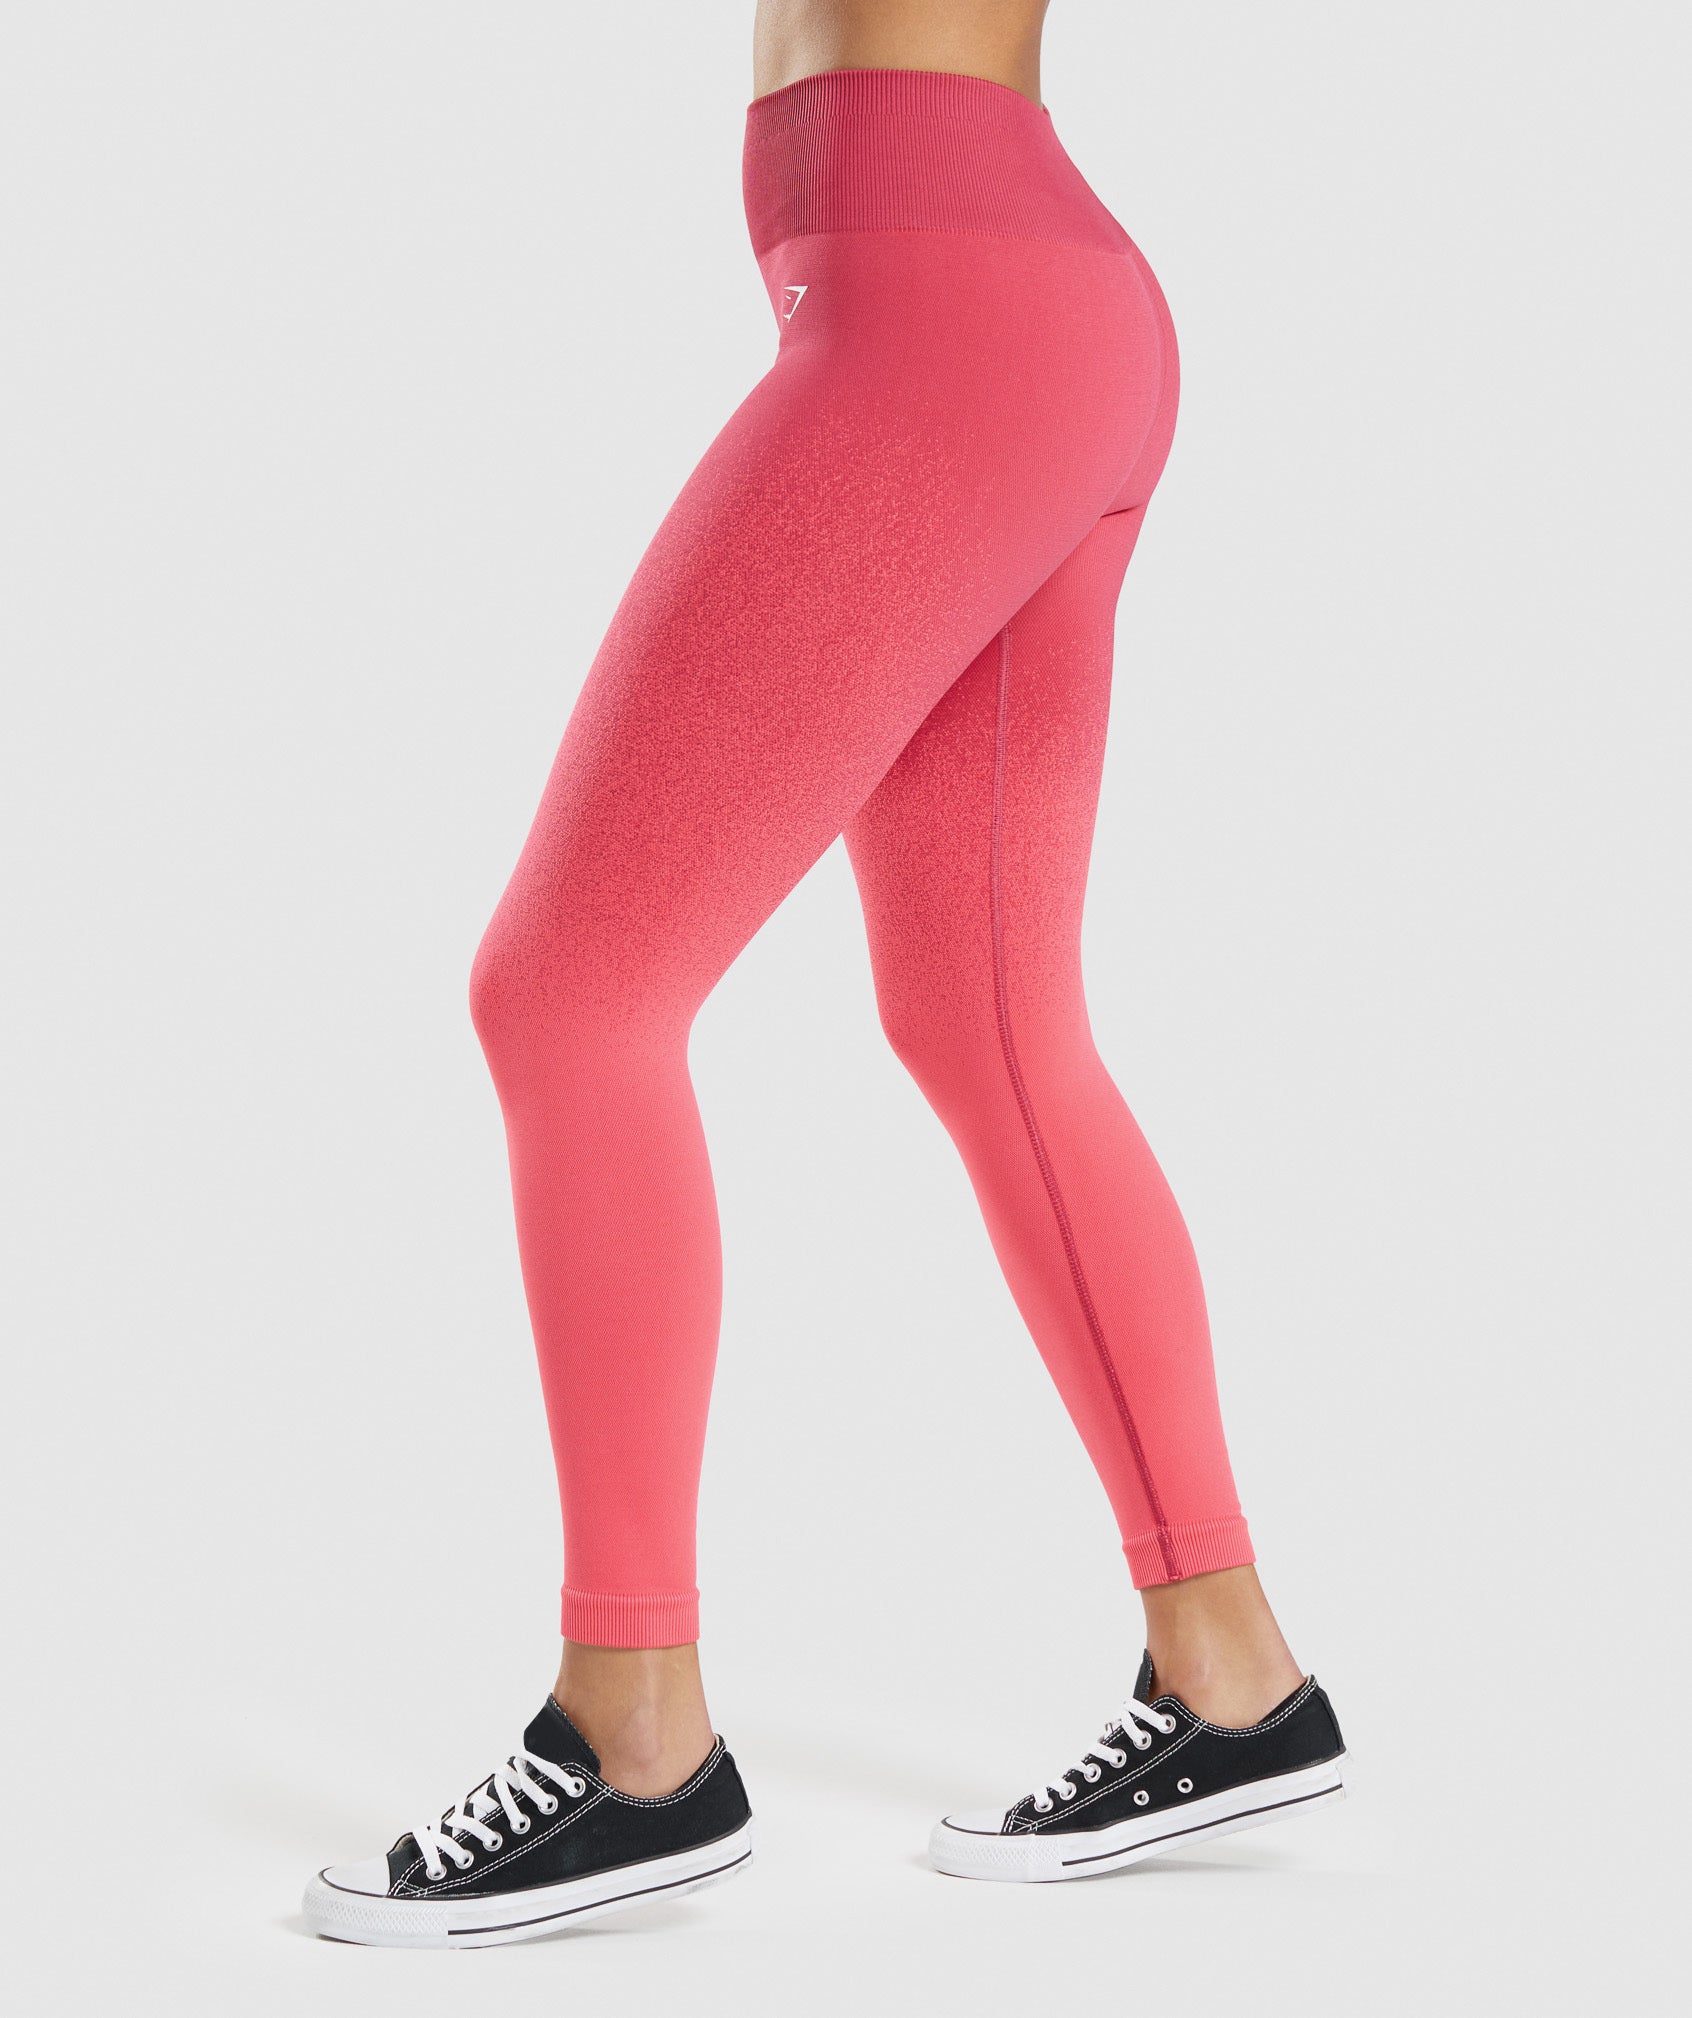 Adapt Ombre Seamless Leggings in Pink/Red - view 4